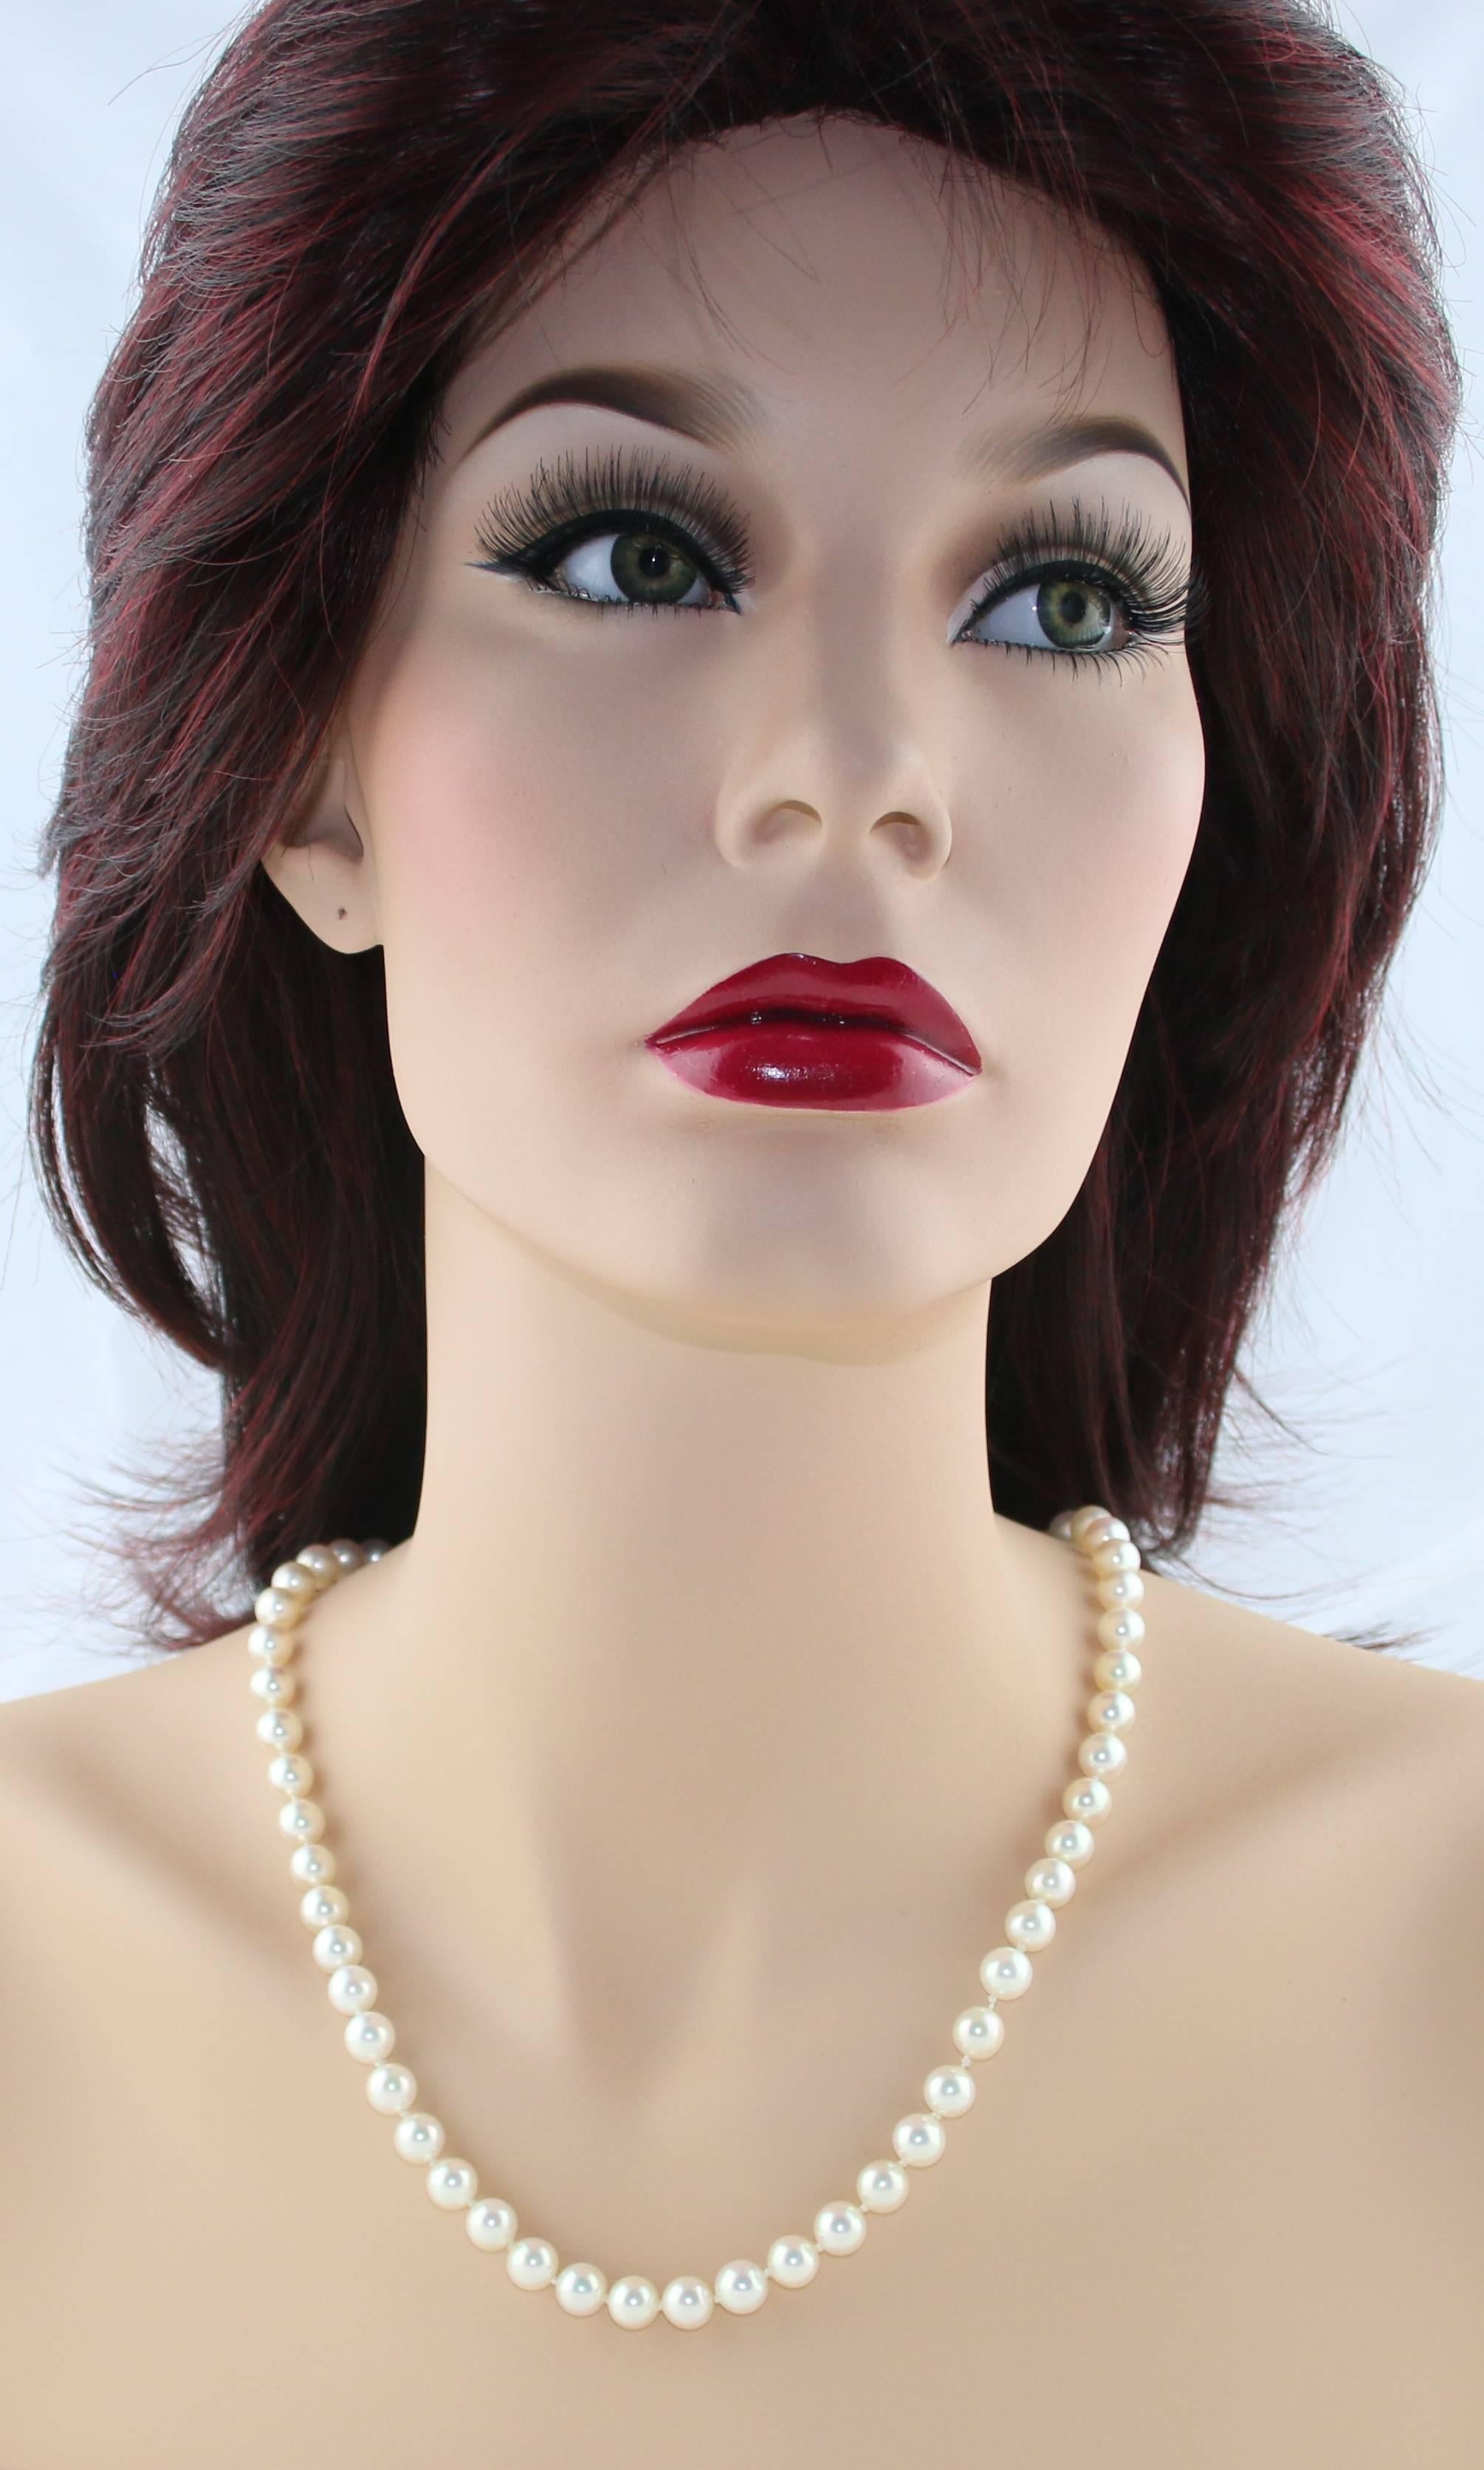 Classic Pearl Necklace
The pearl necklace is by Tiffany & Co.
The clasp is Platinum 950
The Pearls are approximately 8.25MM.
The Pearls are Japanese Cultured Akoya Pearls
The necklace is 23